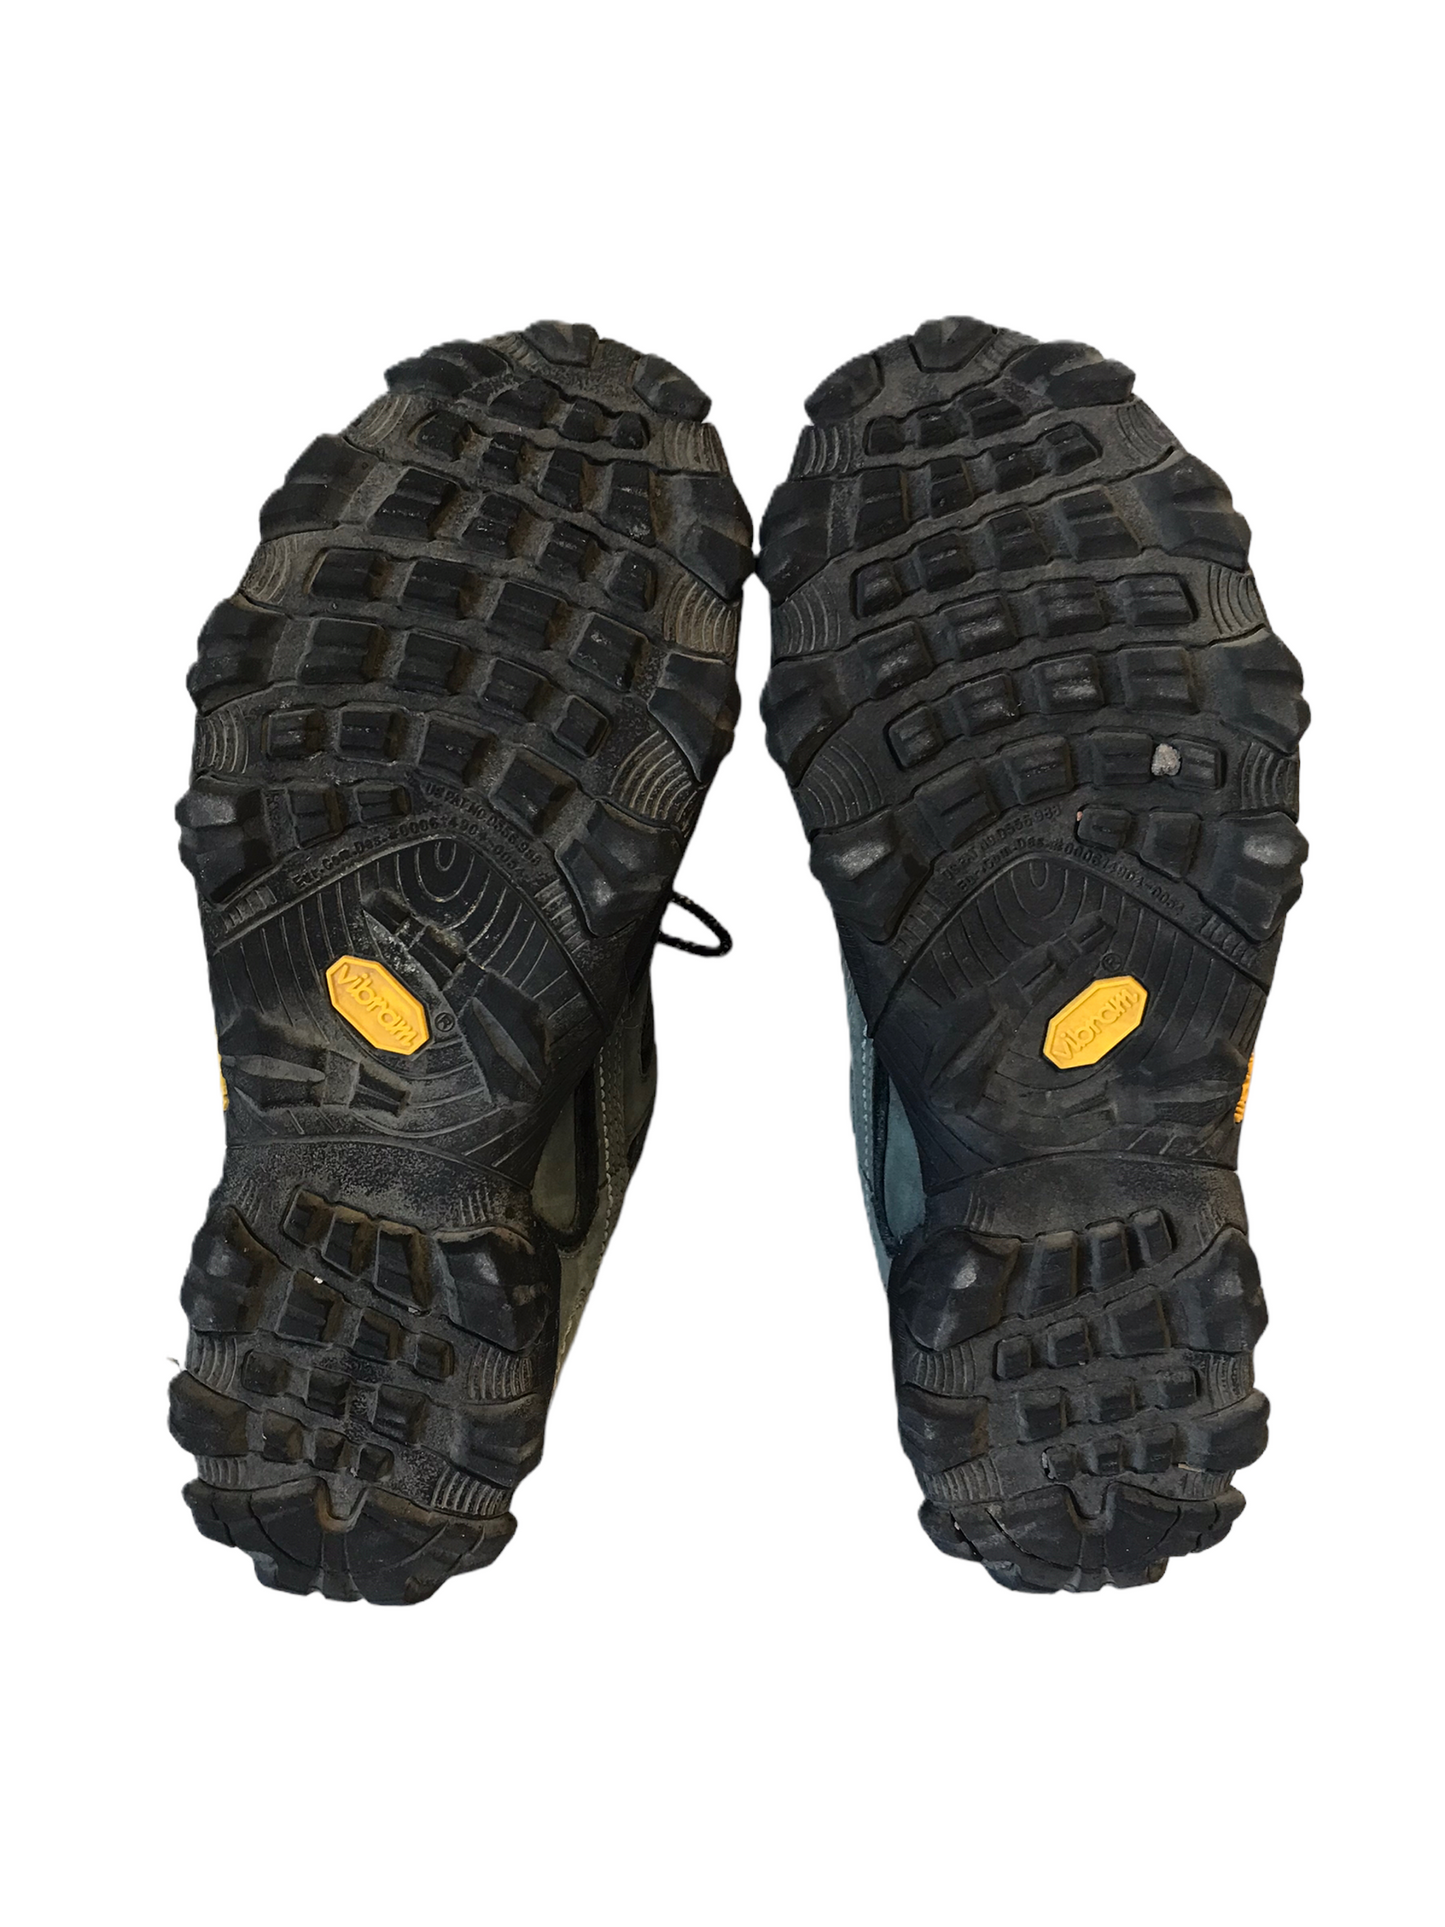 Shoes Athletic By Vibram Size: 10